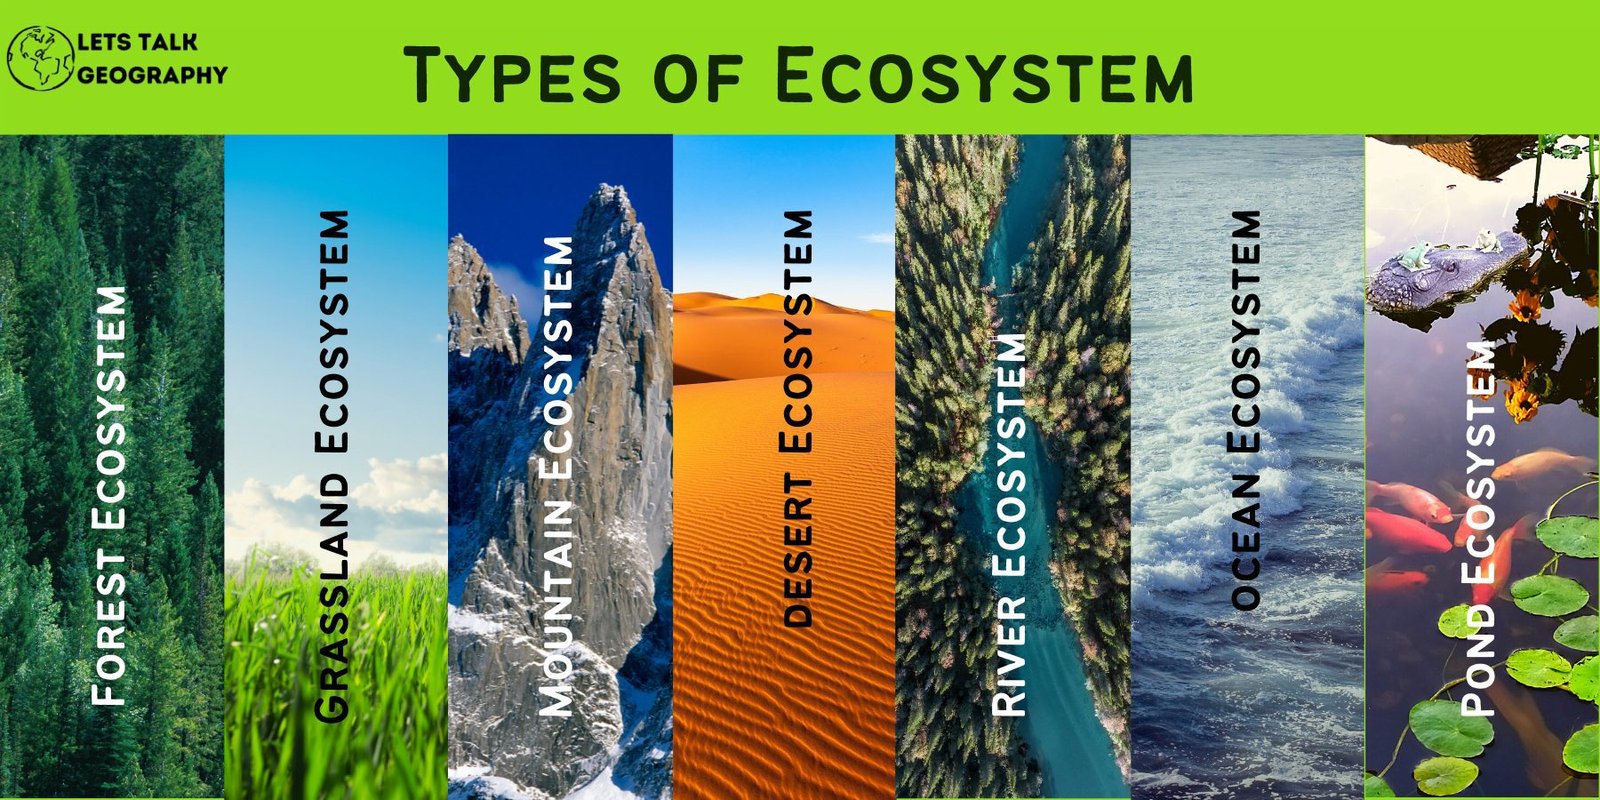 hypothesis about ecosystem